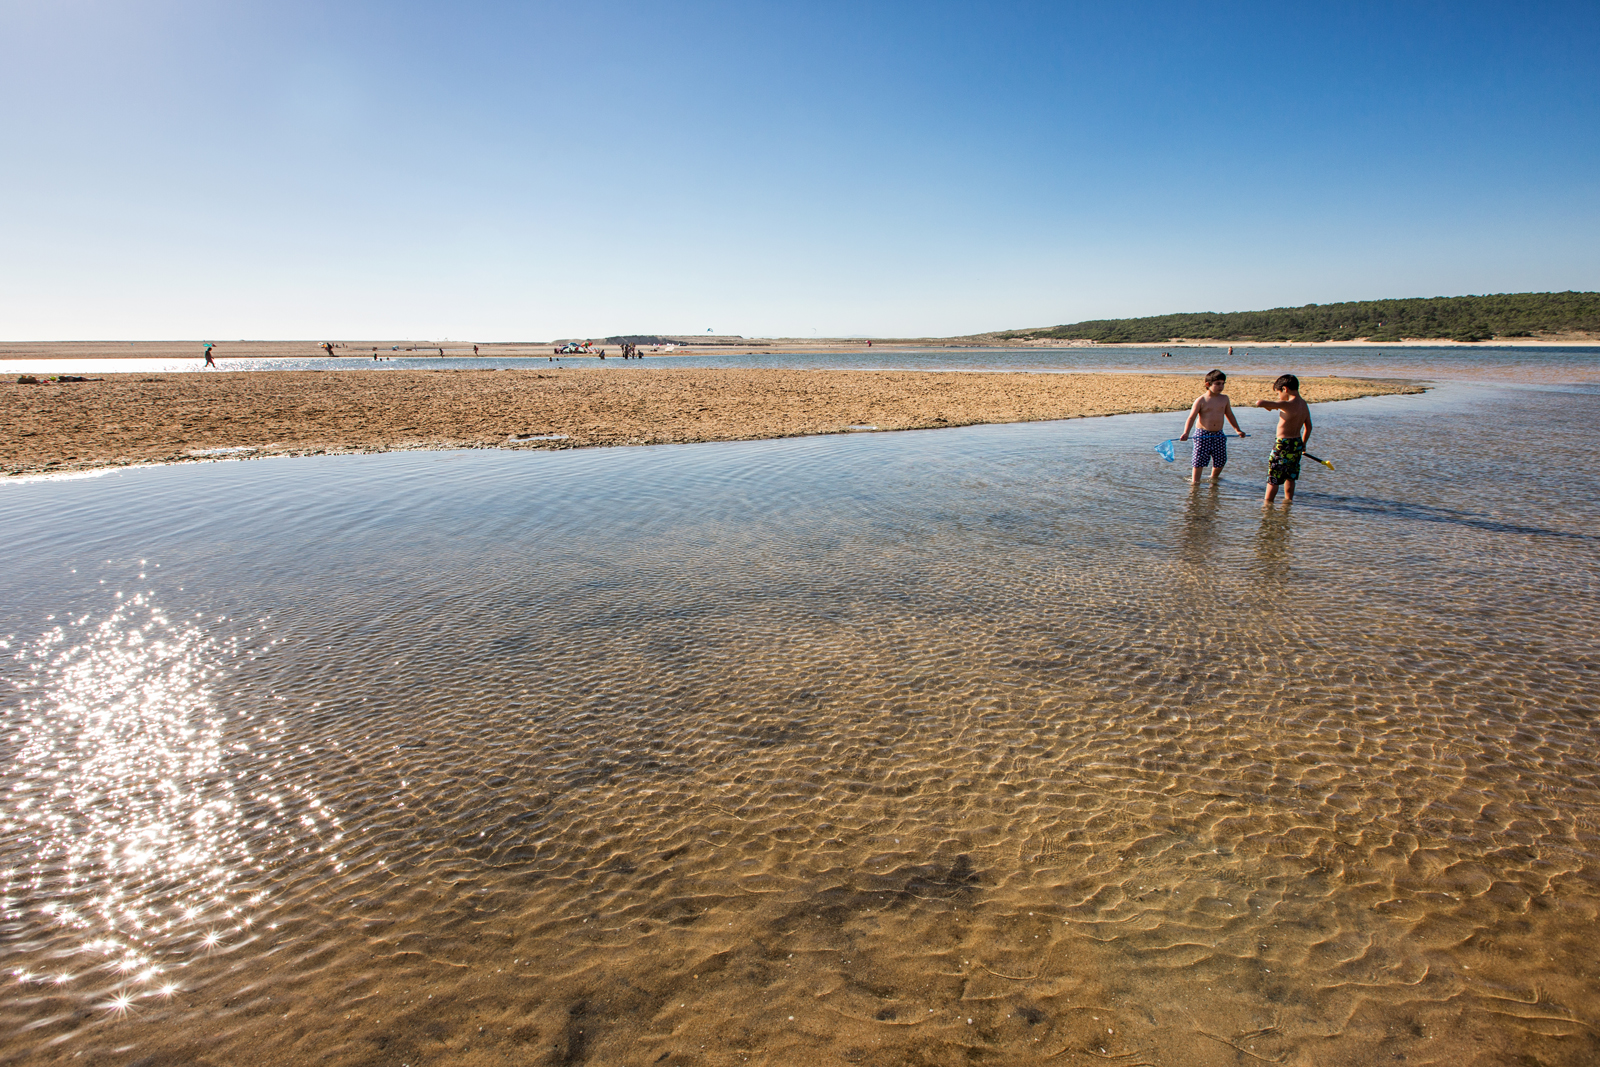 A thick band of shallow, clear water winds through a sandy expanse. Two young children stand in the water, talking to each other. One is holding a fishing net and the other is holding a spade. In the distance, a low hill covered in greenery. The sky is empty of clouds.